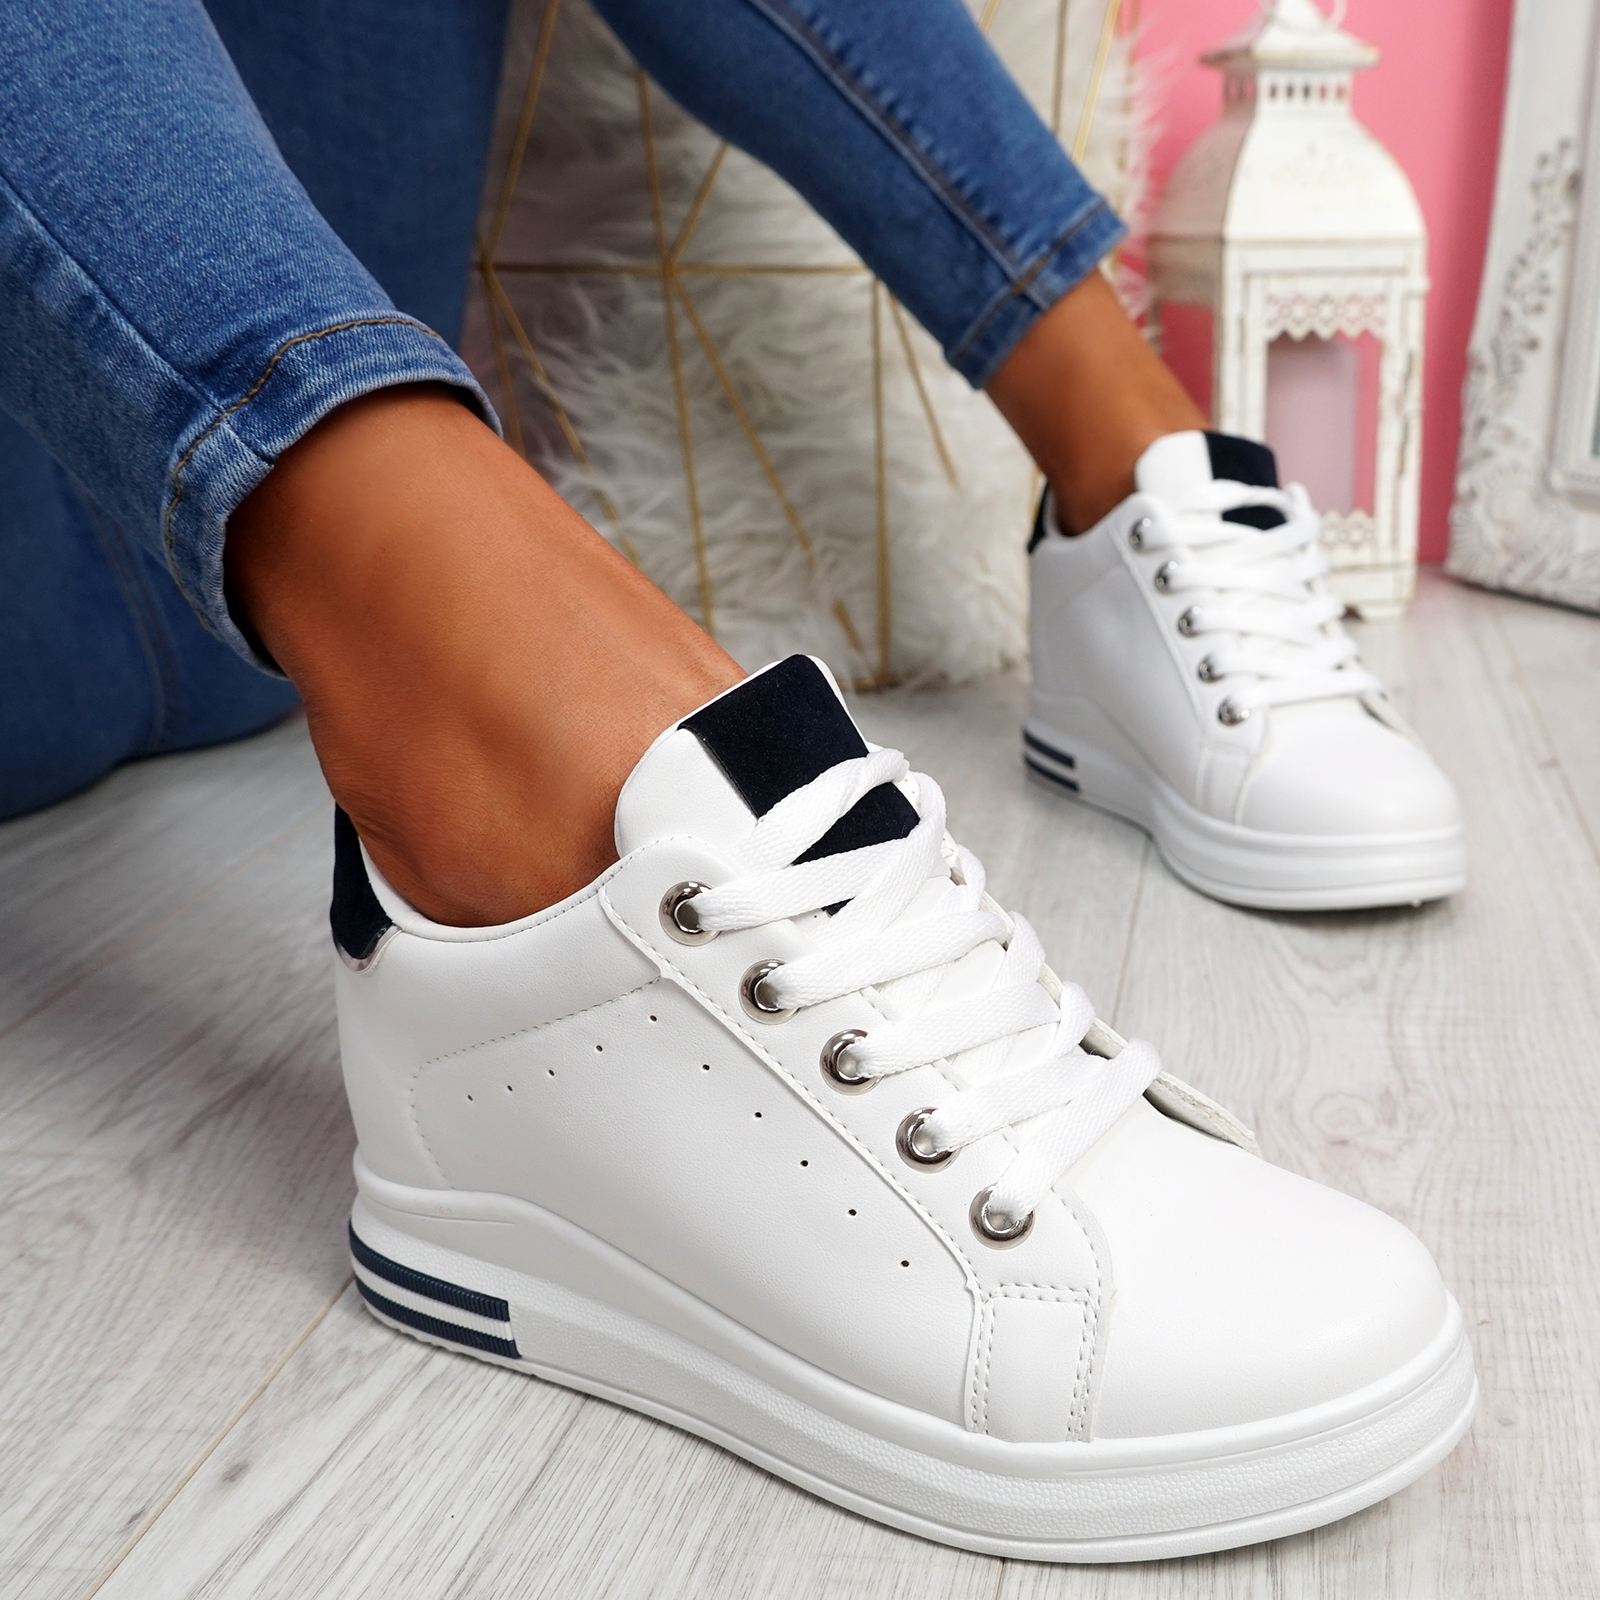 WOMEN LADIES SNEAKERS FASHION LACE UP FLATS TRAINERS SHOES SIZE 3-8 